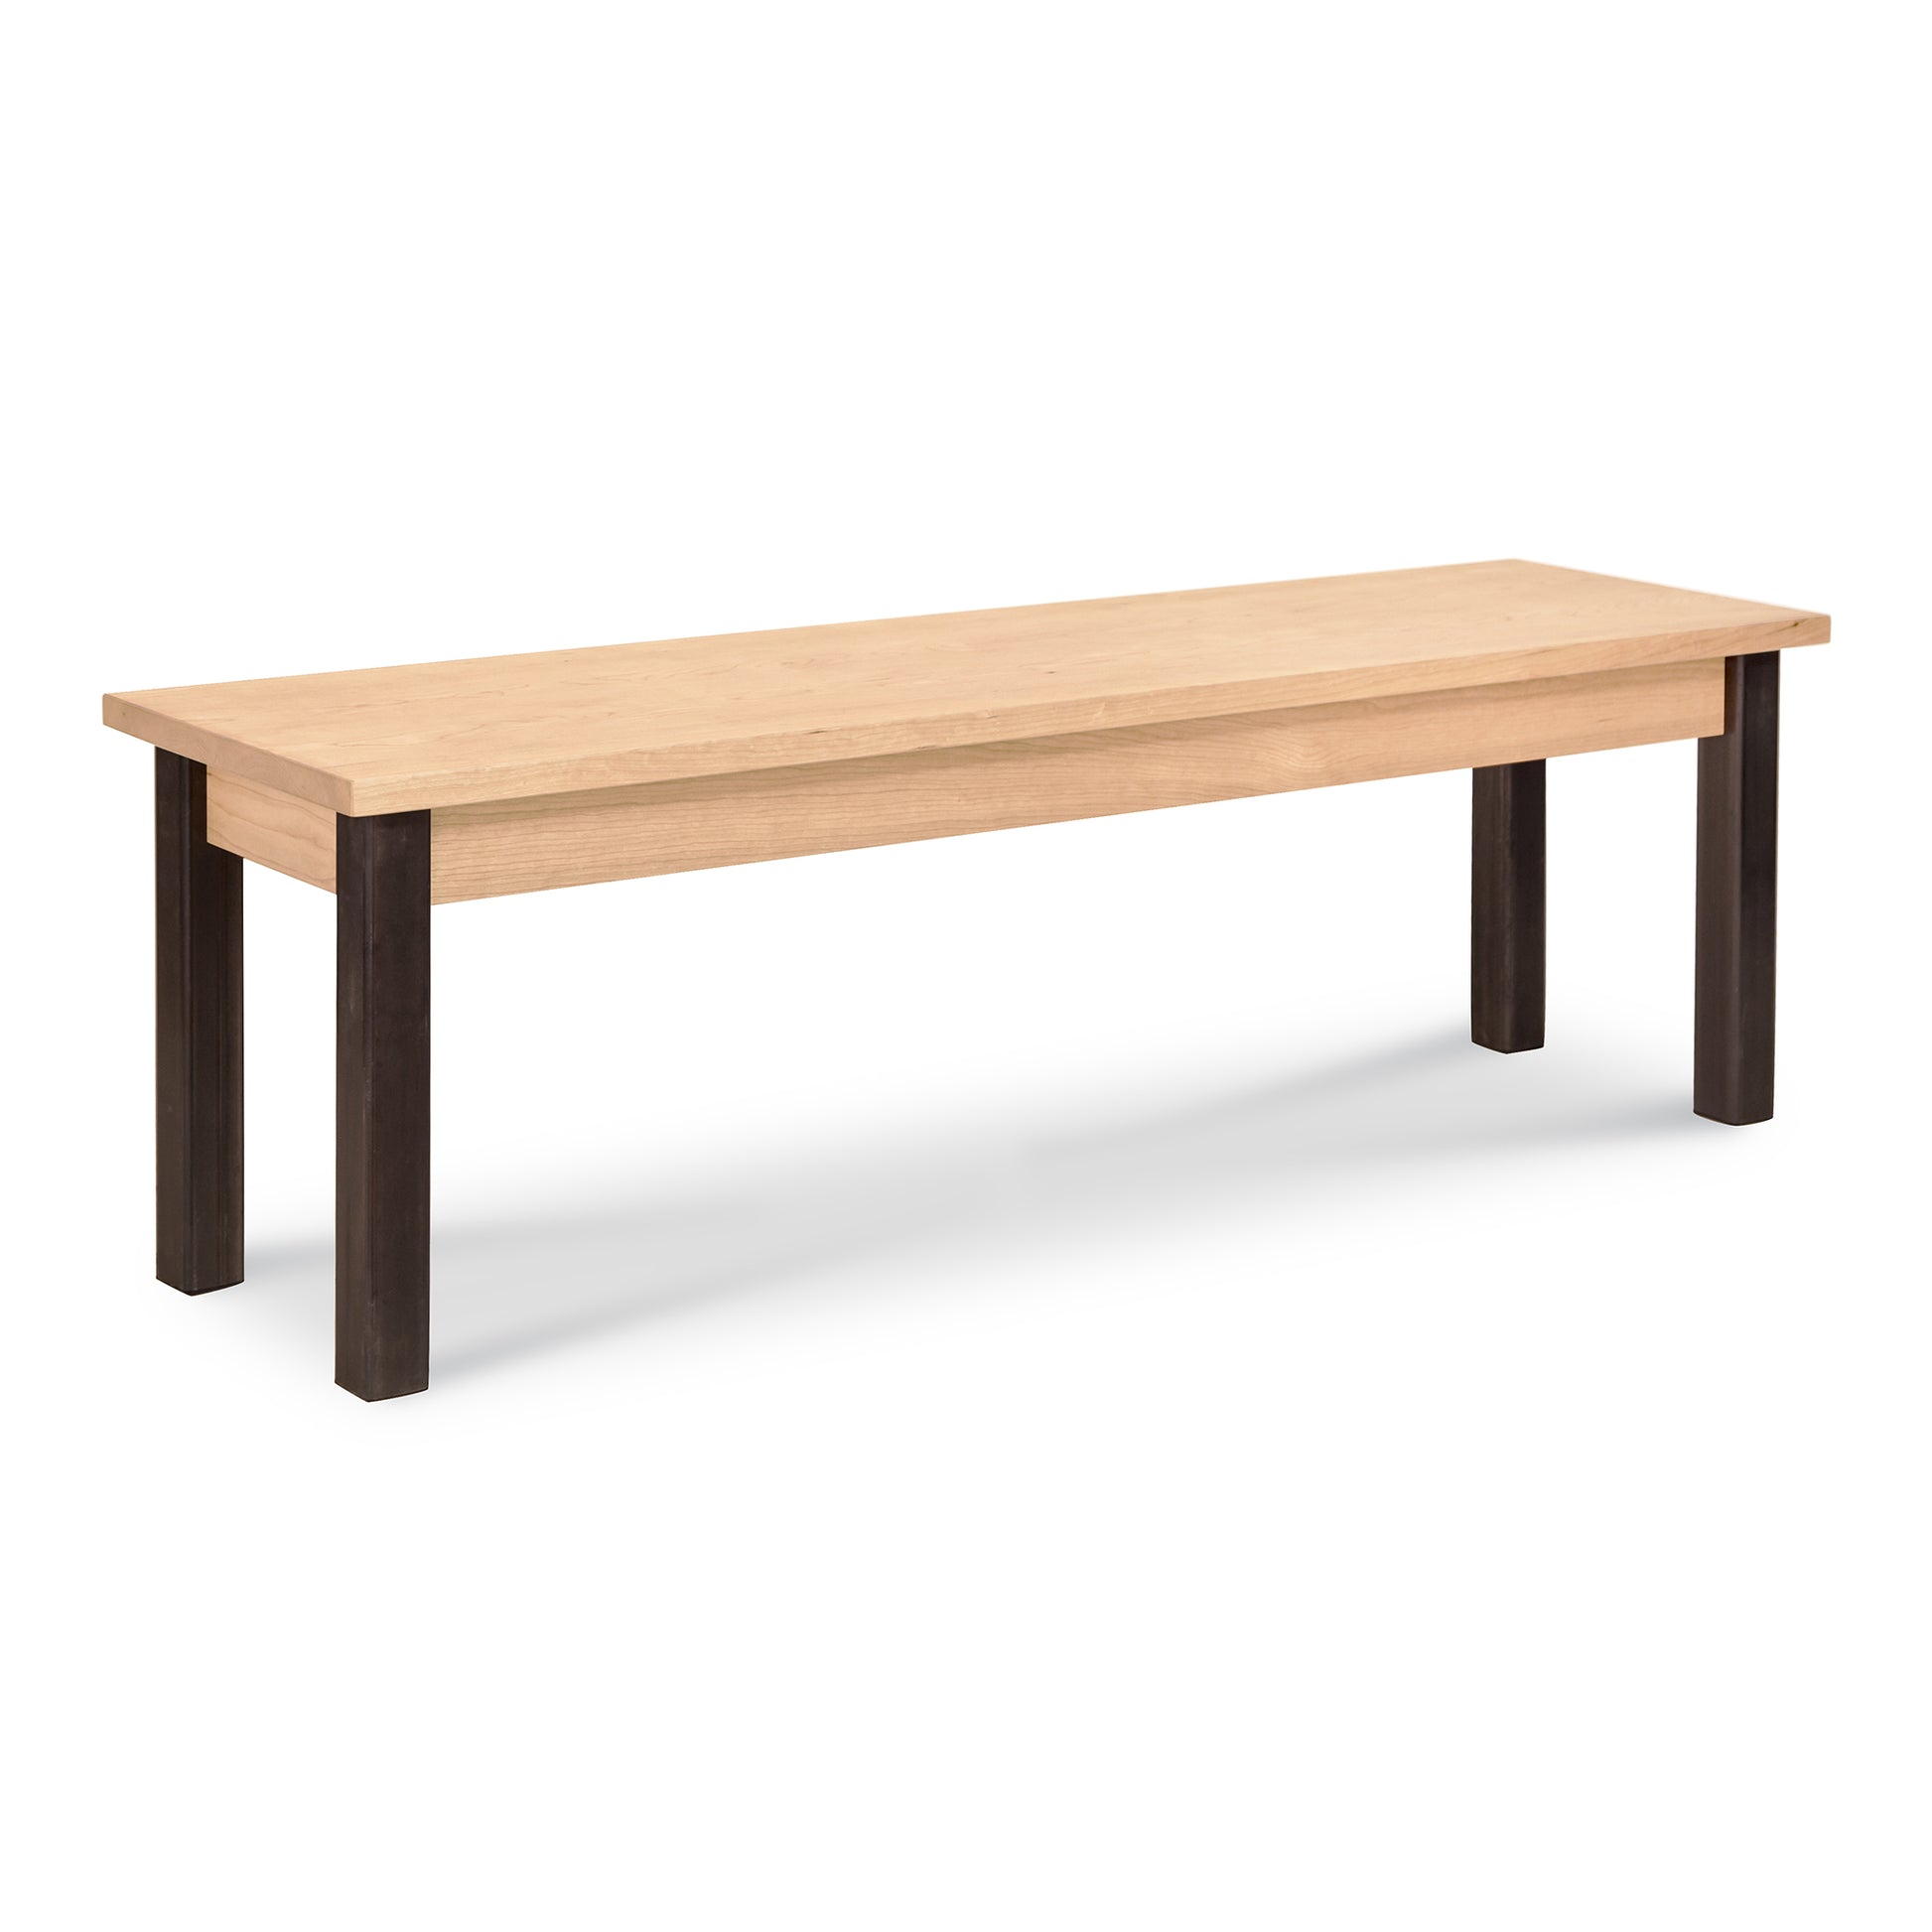 A wooden bench with black legs on a white background.